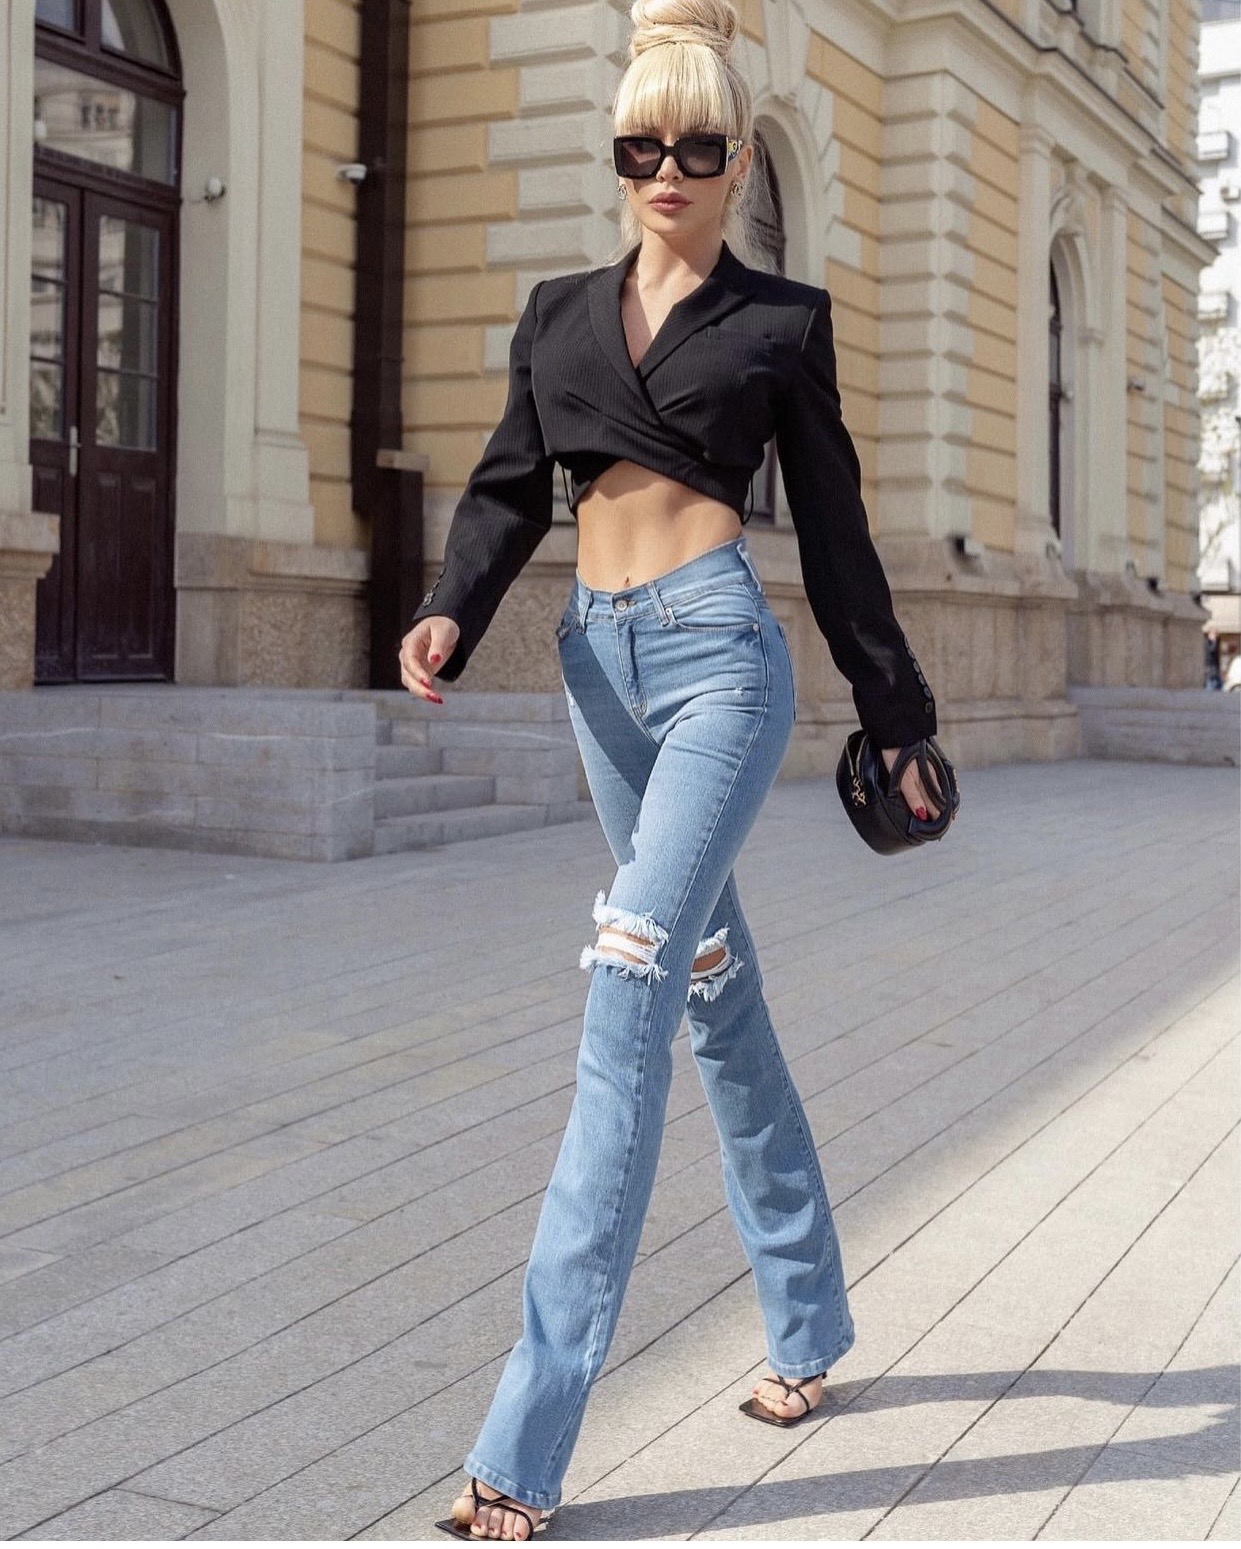 Valentina Safronova in a hot casual chic look - Slaylebrity